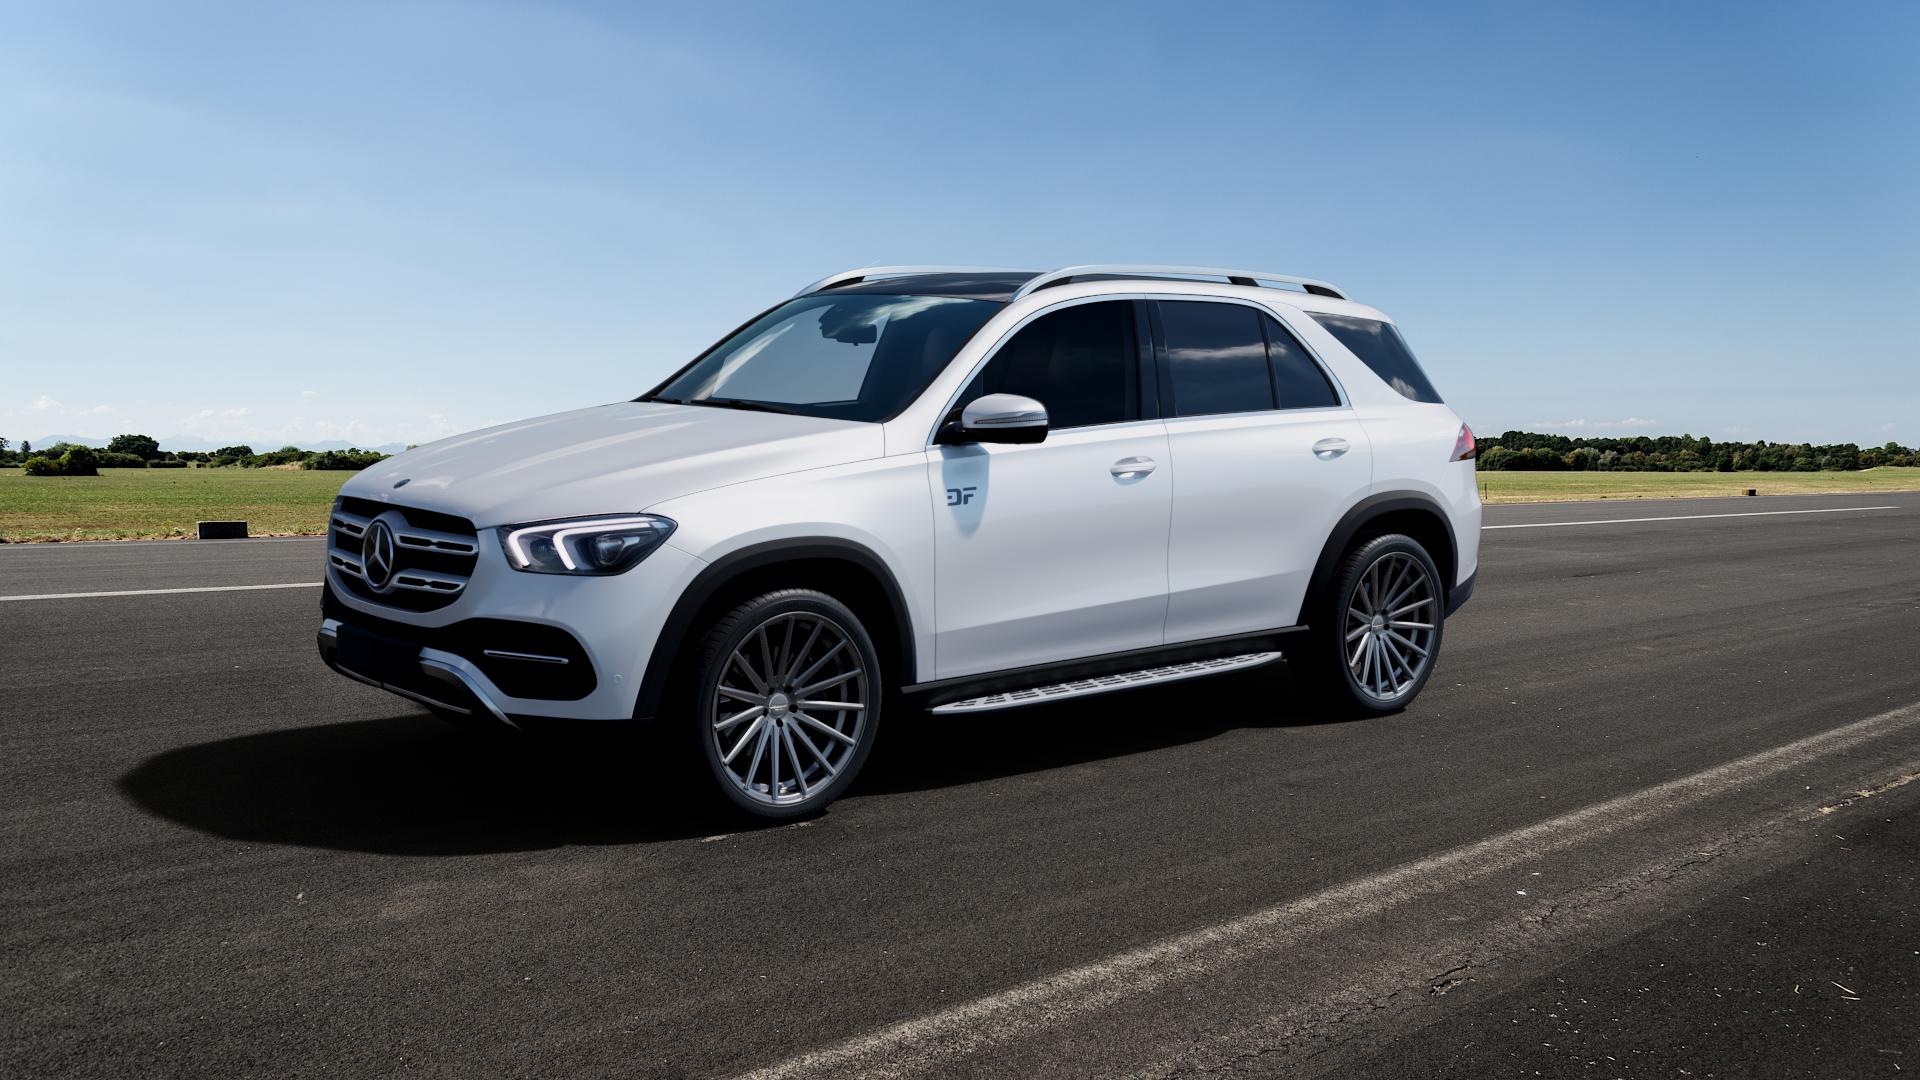 Mercedes GLE-Class SUV Type V167 (H1GLE) 4,0l AMG GLE 63 4Matic+ 420kW  Mild-Hybrid (571 hp) Wheels and Tyre Packages | velonity.com